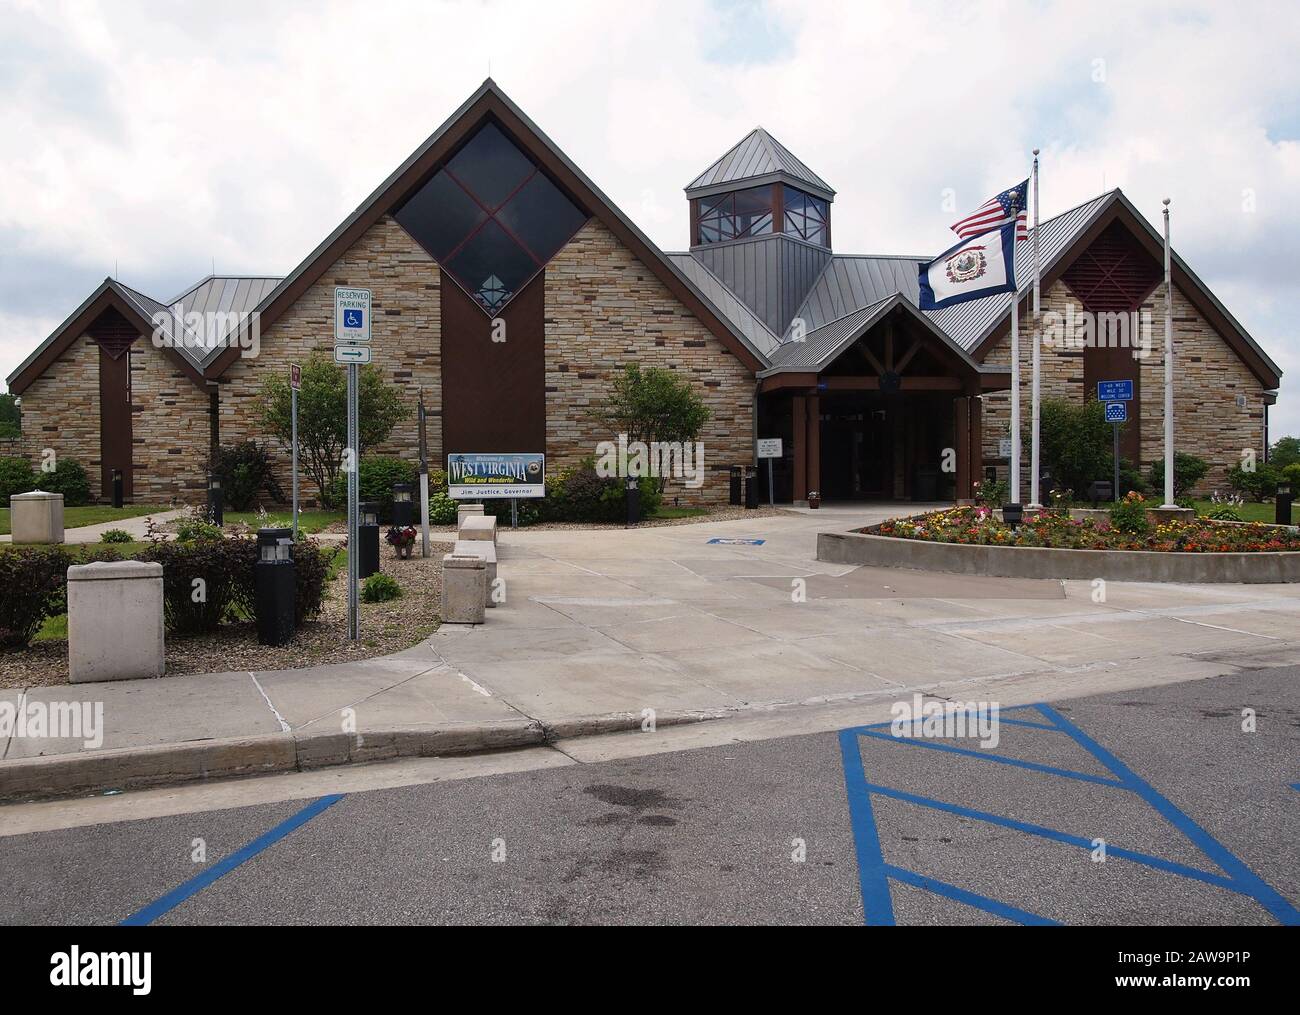 BRUCETON MILLS, WEST VIRGINIA - JULY 11, 2019: The I-68 Welcome Center in Bruceton Mills, WV welcomes visitors to the state with tourist information, Stock Photo